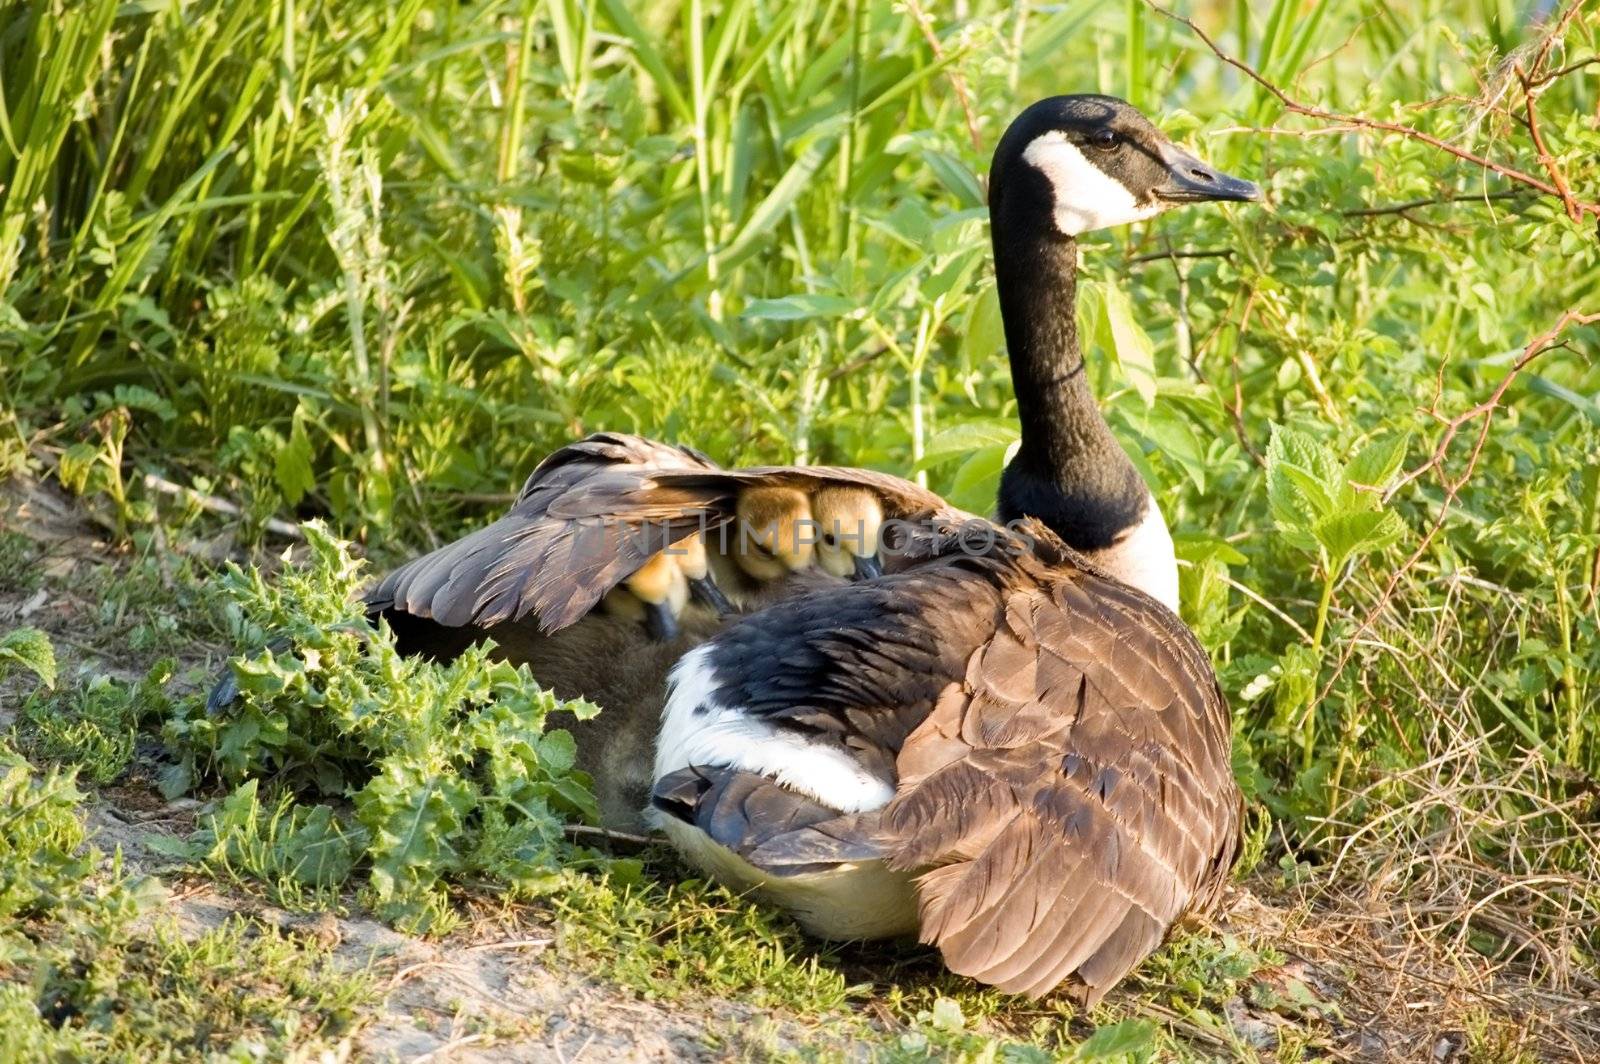 Four Canada goose goslings under the wing of their mother.